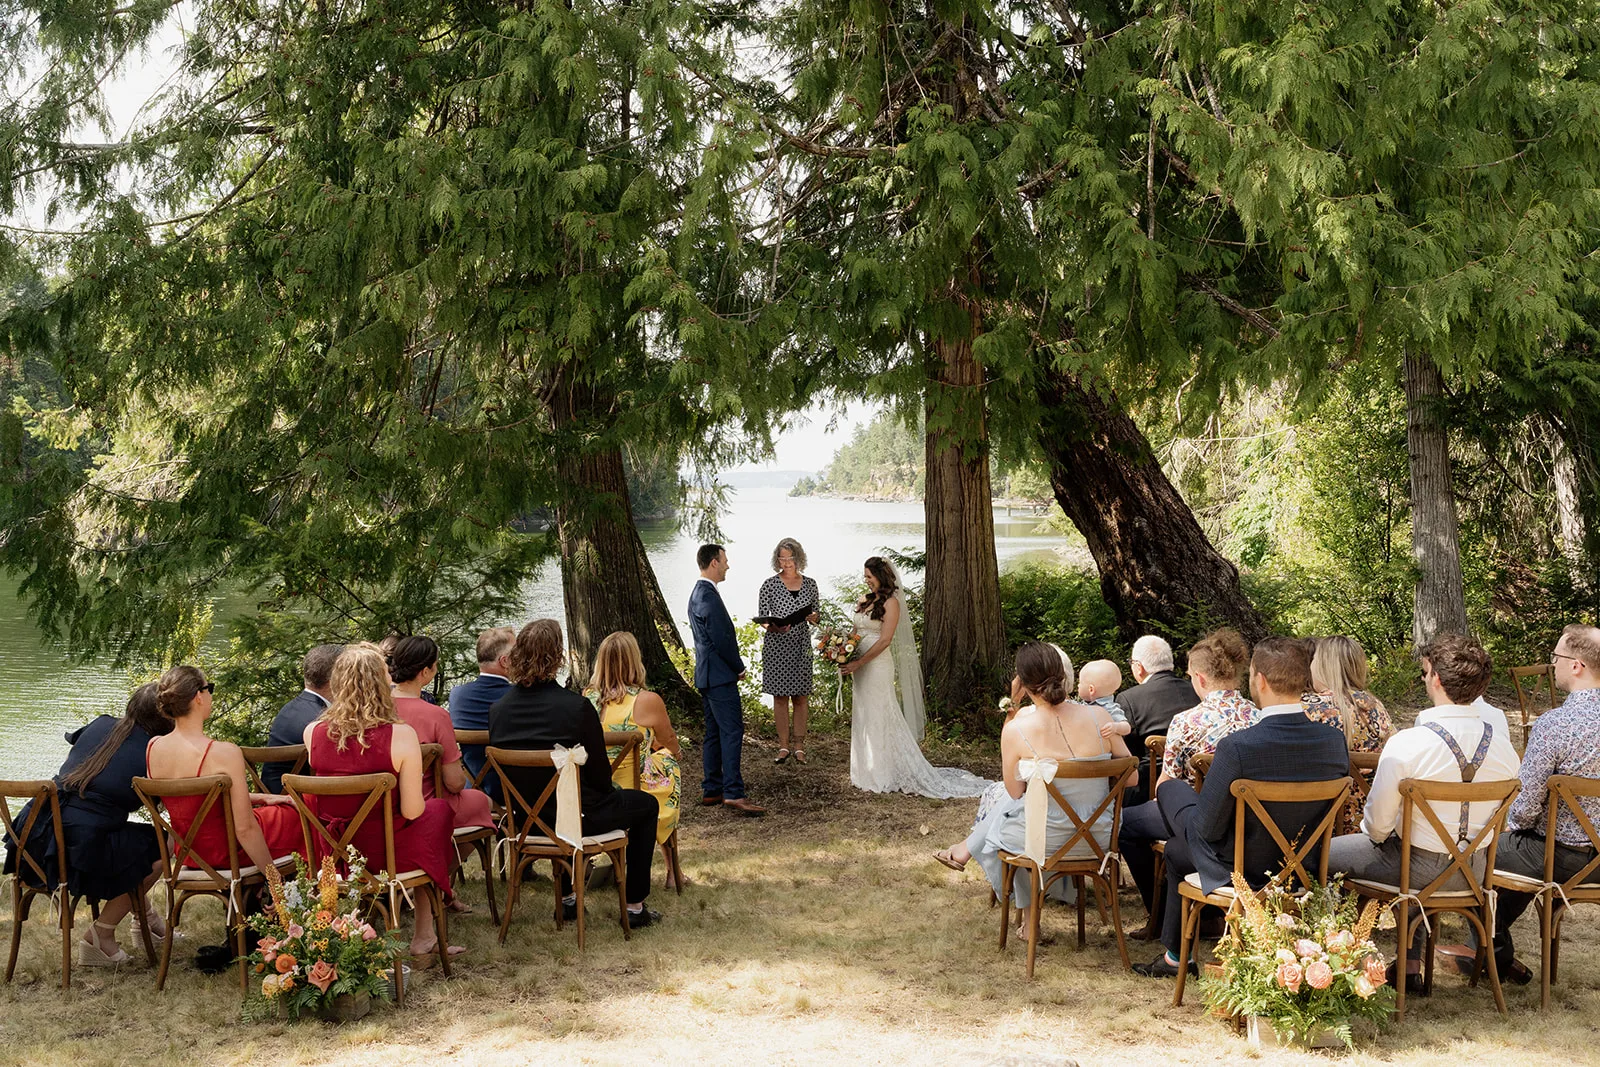 Officiant Amanda leading a ceremony under the trees on Vancouver Island